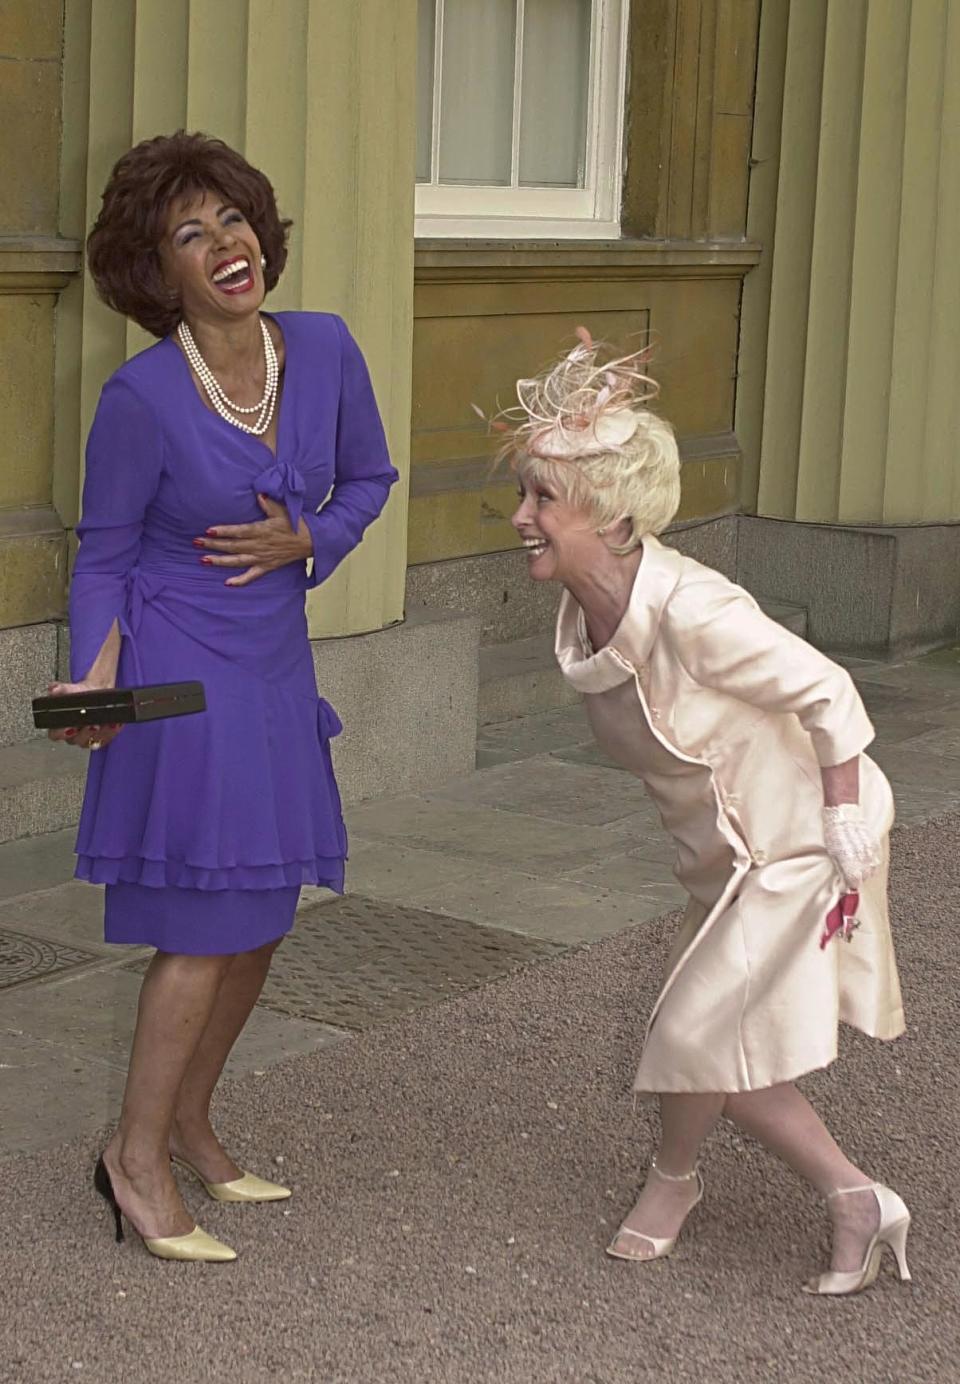 Welsh singer Dame Shirley Bassey is entertained as she receives a curtsy from British actress Barbara Windsor who received an MBE, during a ceremony held at Buckingham Palace where they received their awards from the Queen Elizabeth II. (Photo by John Stillwell - PA Images/PA Images via Getty Images)